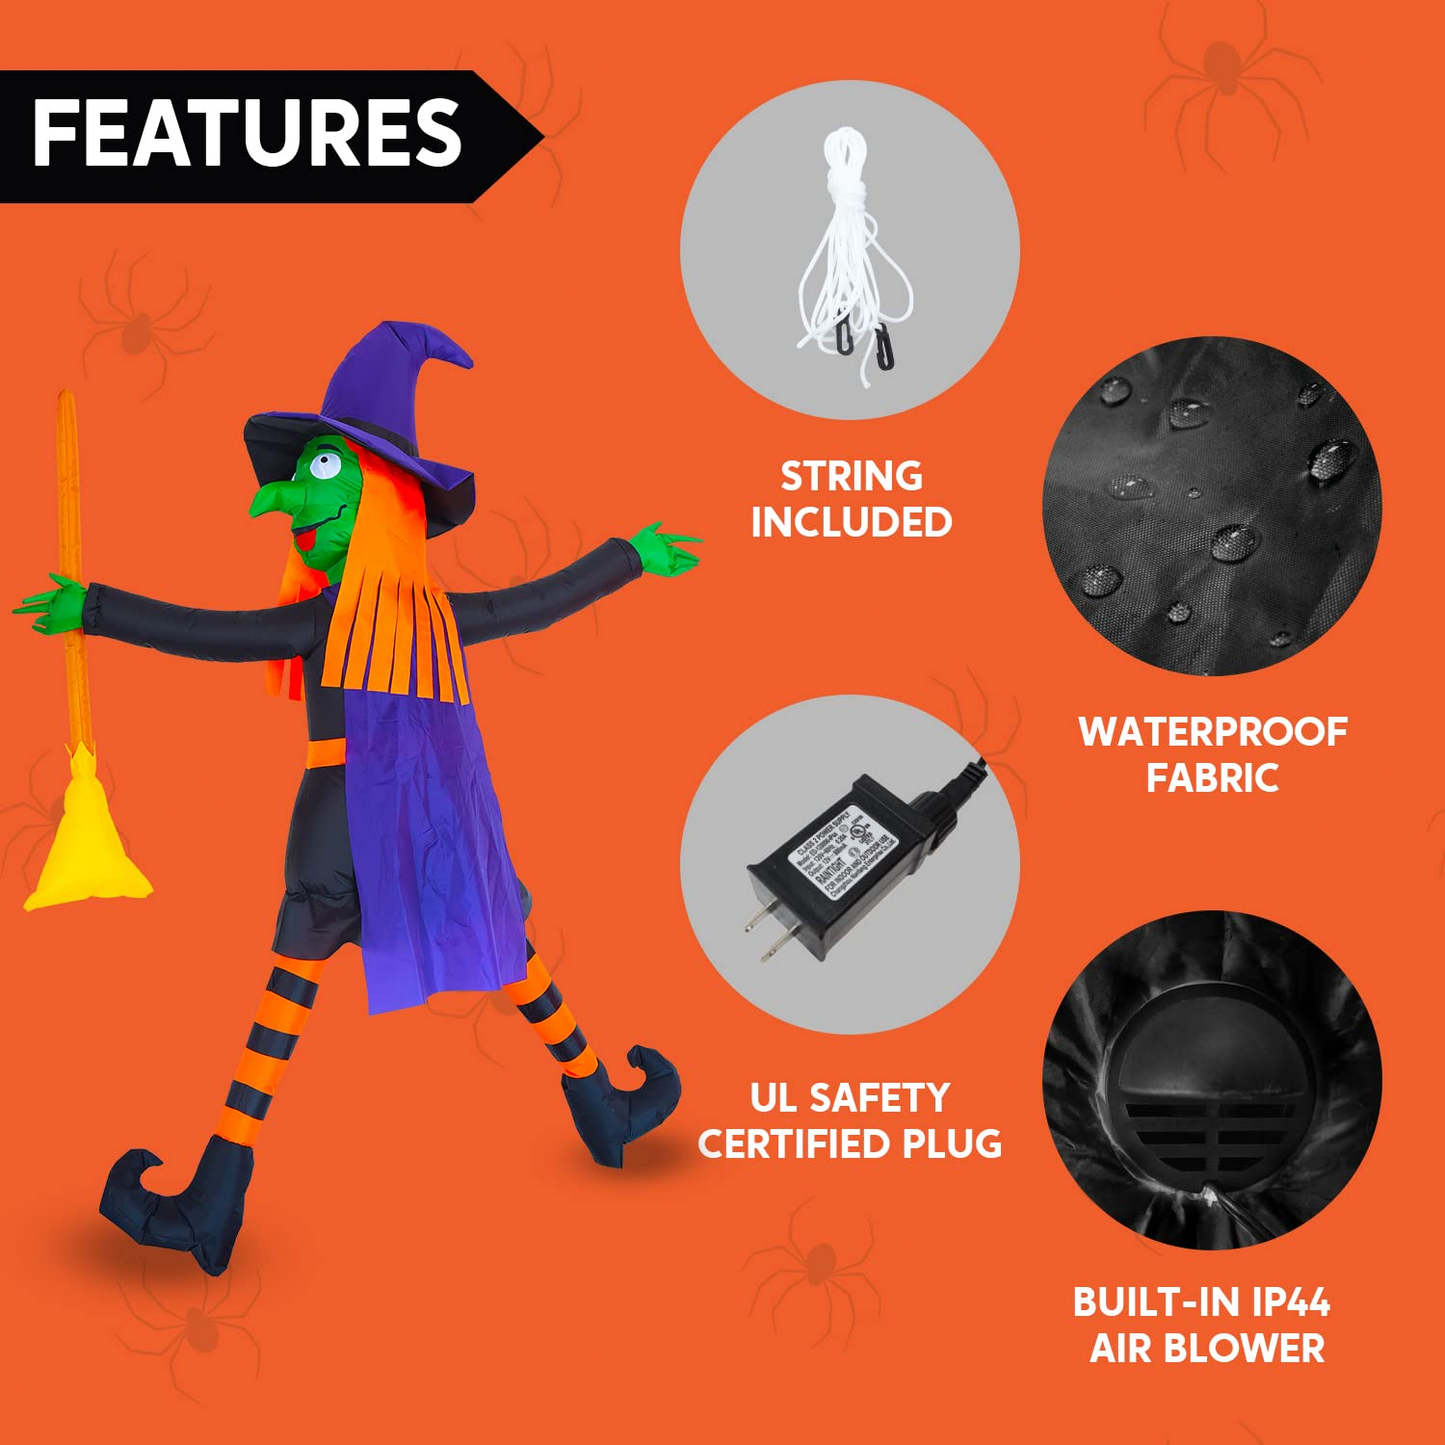 6ft Inflatable Crashing Witch